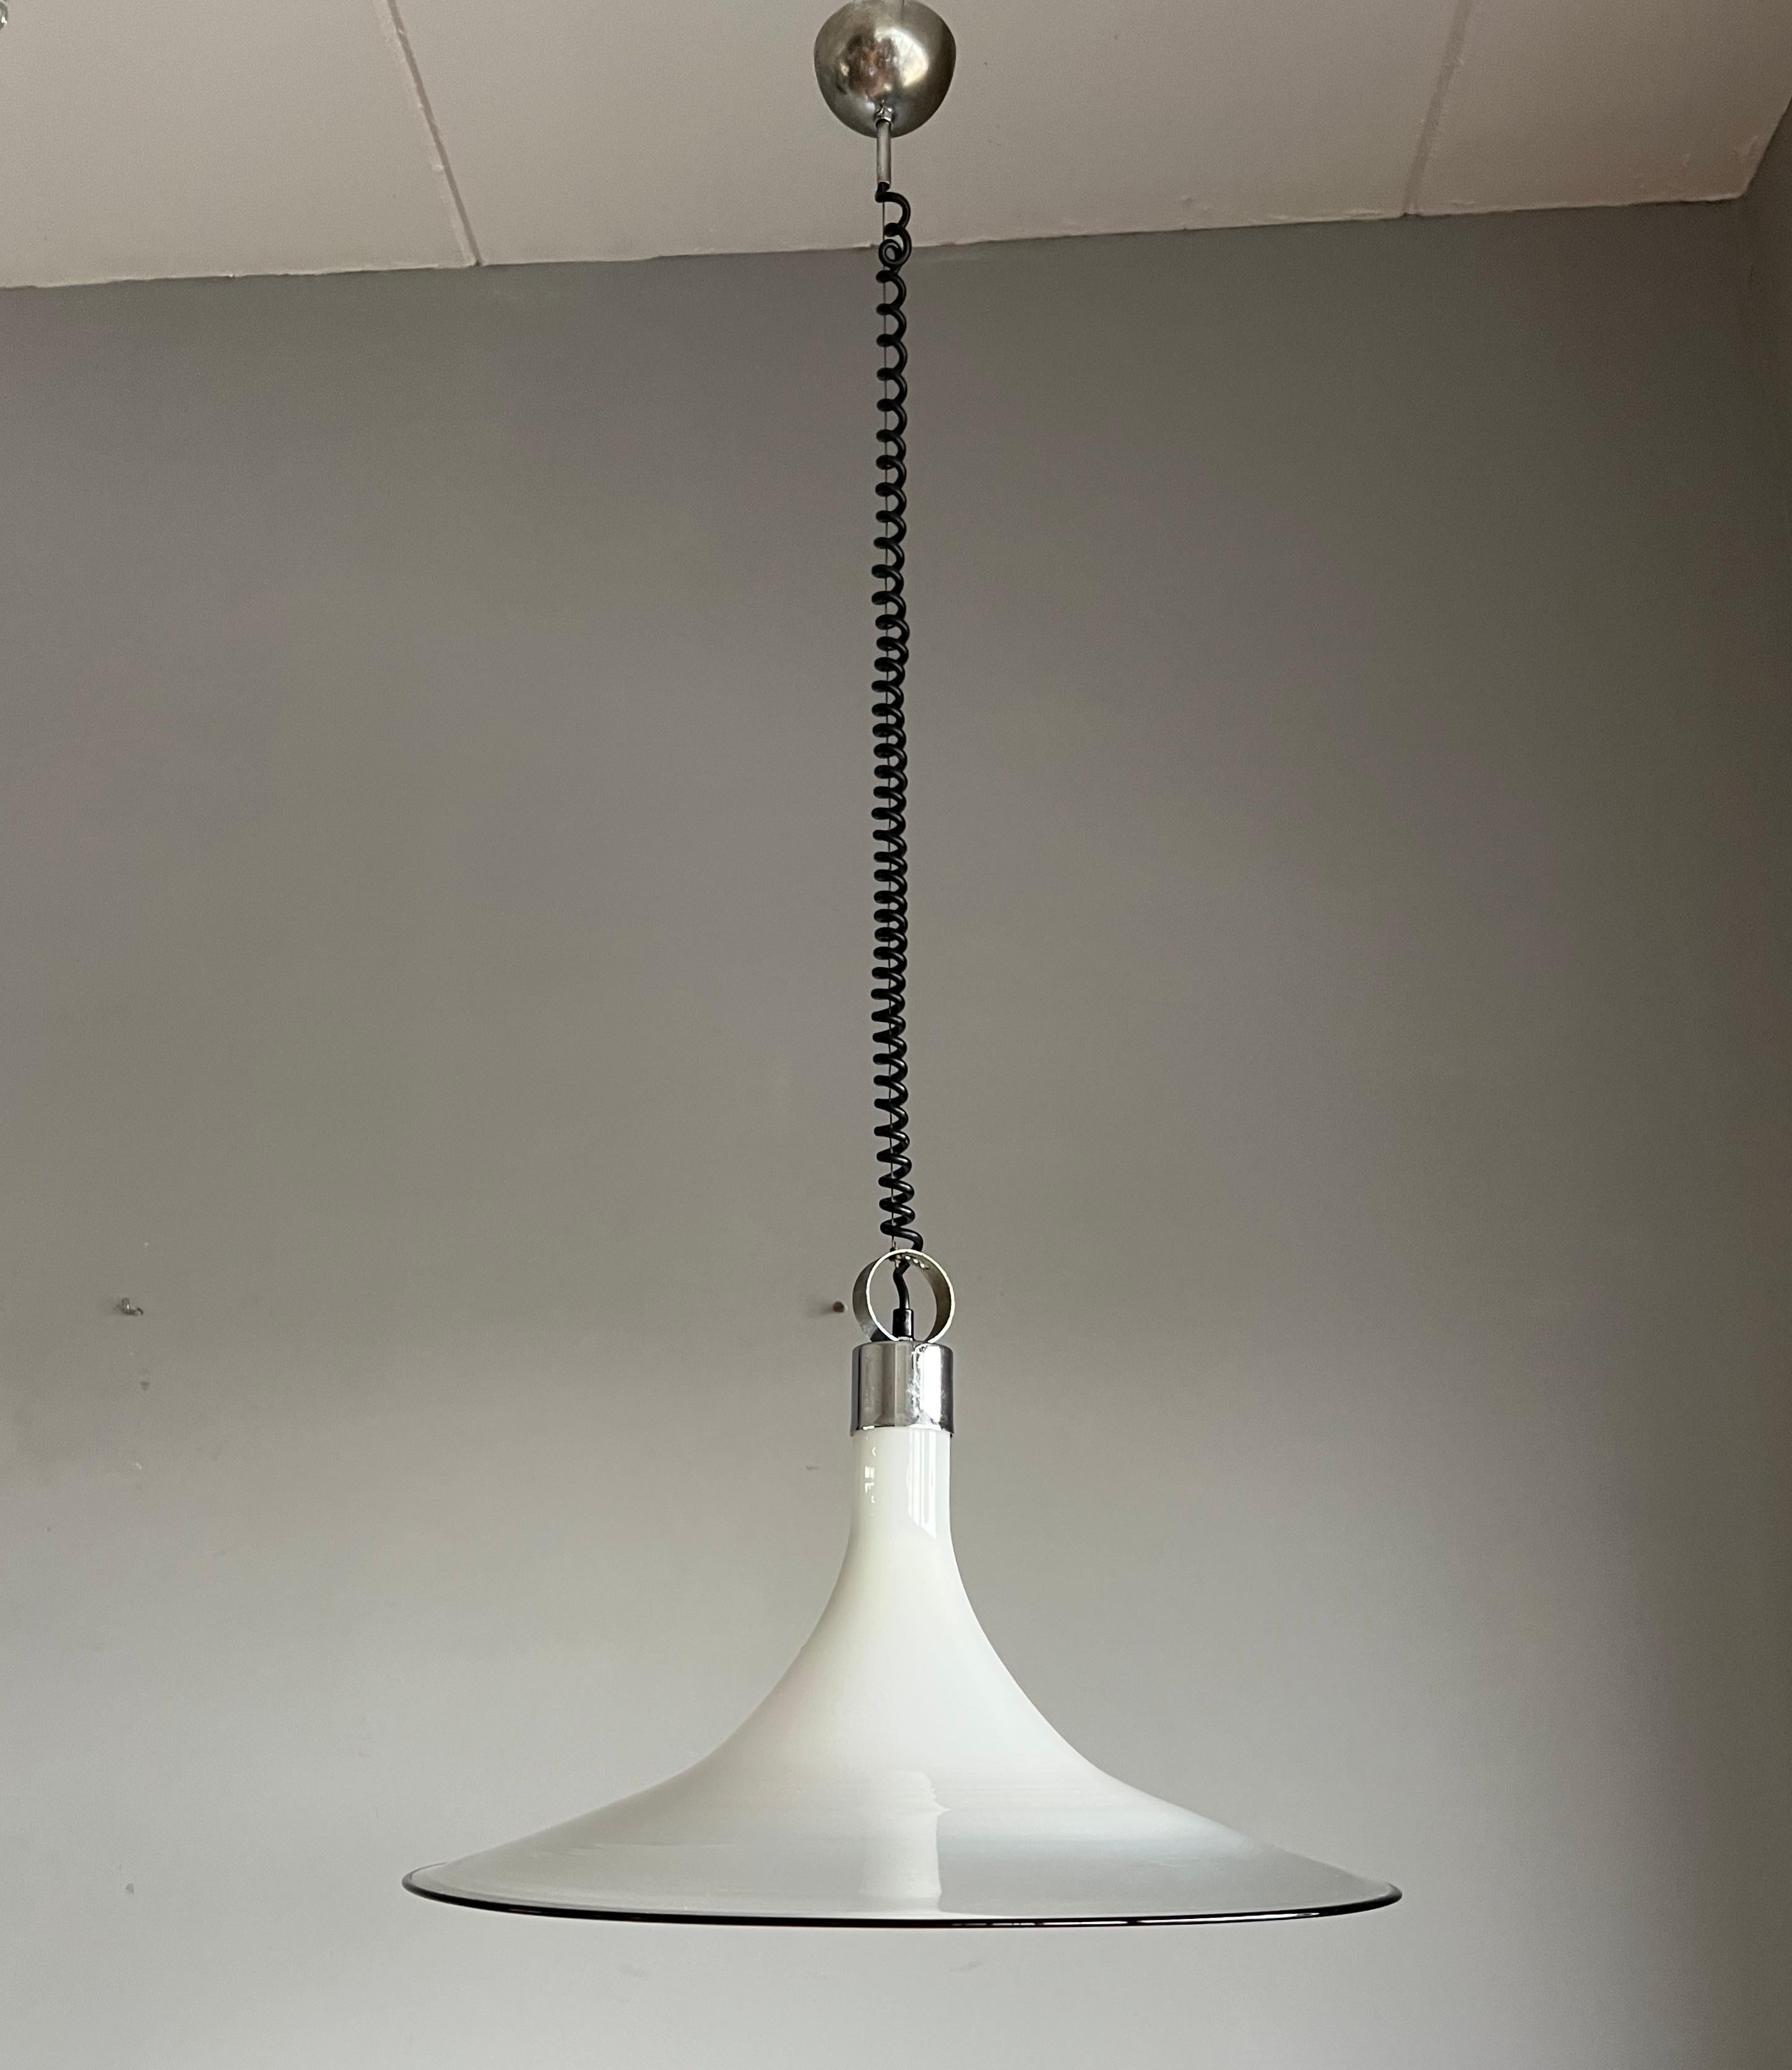 Wonderful Midcentury chandelier.

If you are looking for a rare and stylish mid-20th century fixture to grace your home or work space then this handcrafted Italian light could be perfect. One person might see an upside down vortex of liquid glass